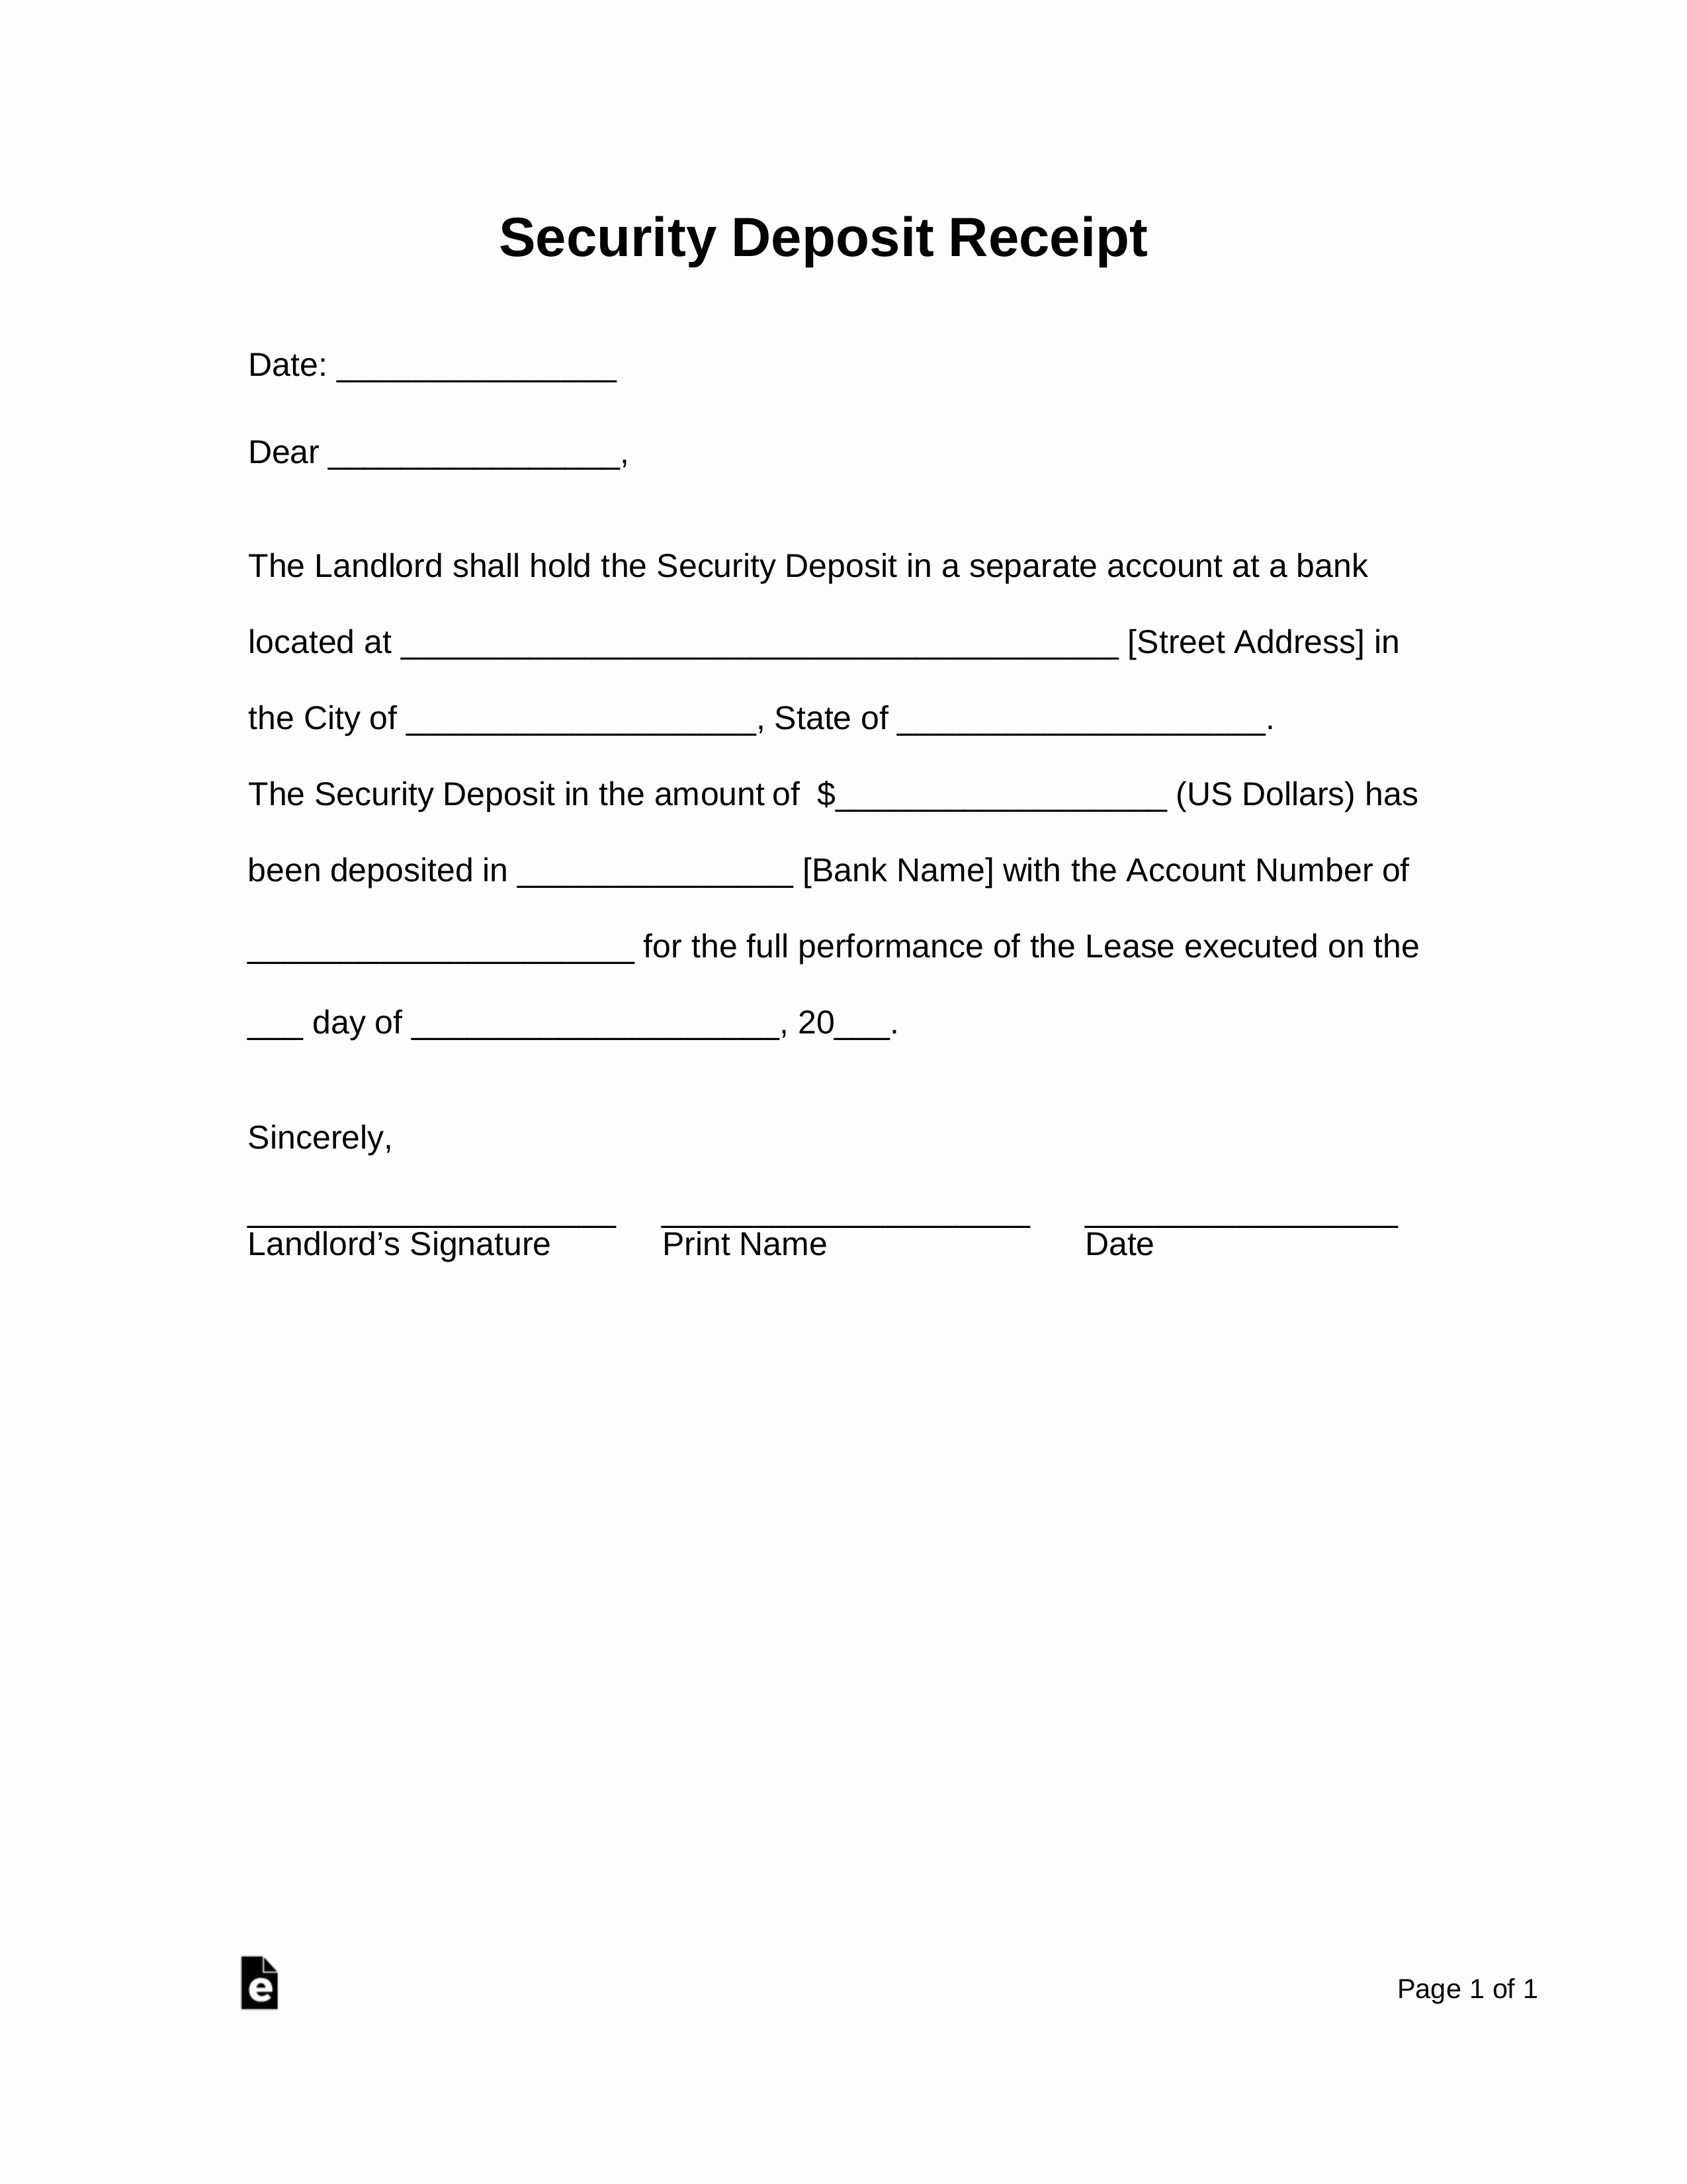 Security Deposit Receipt Template Awesome Free Security Deposit Receipt Template Pdf